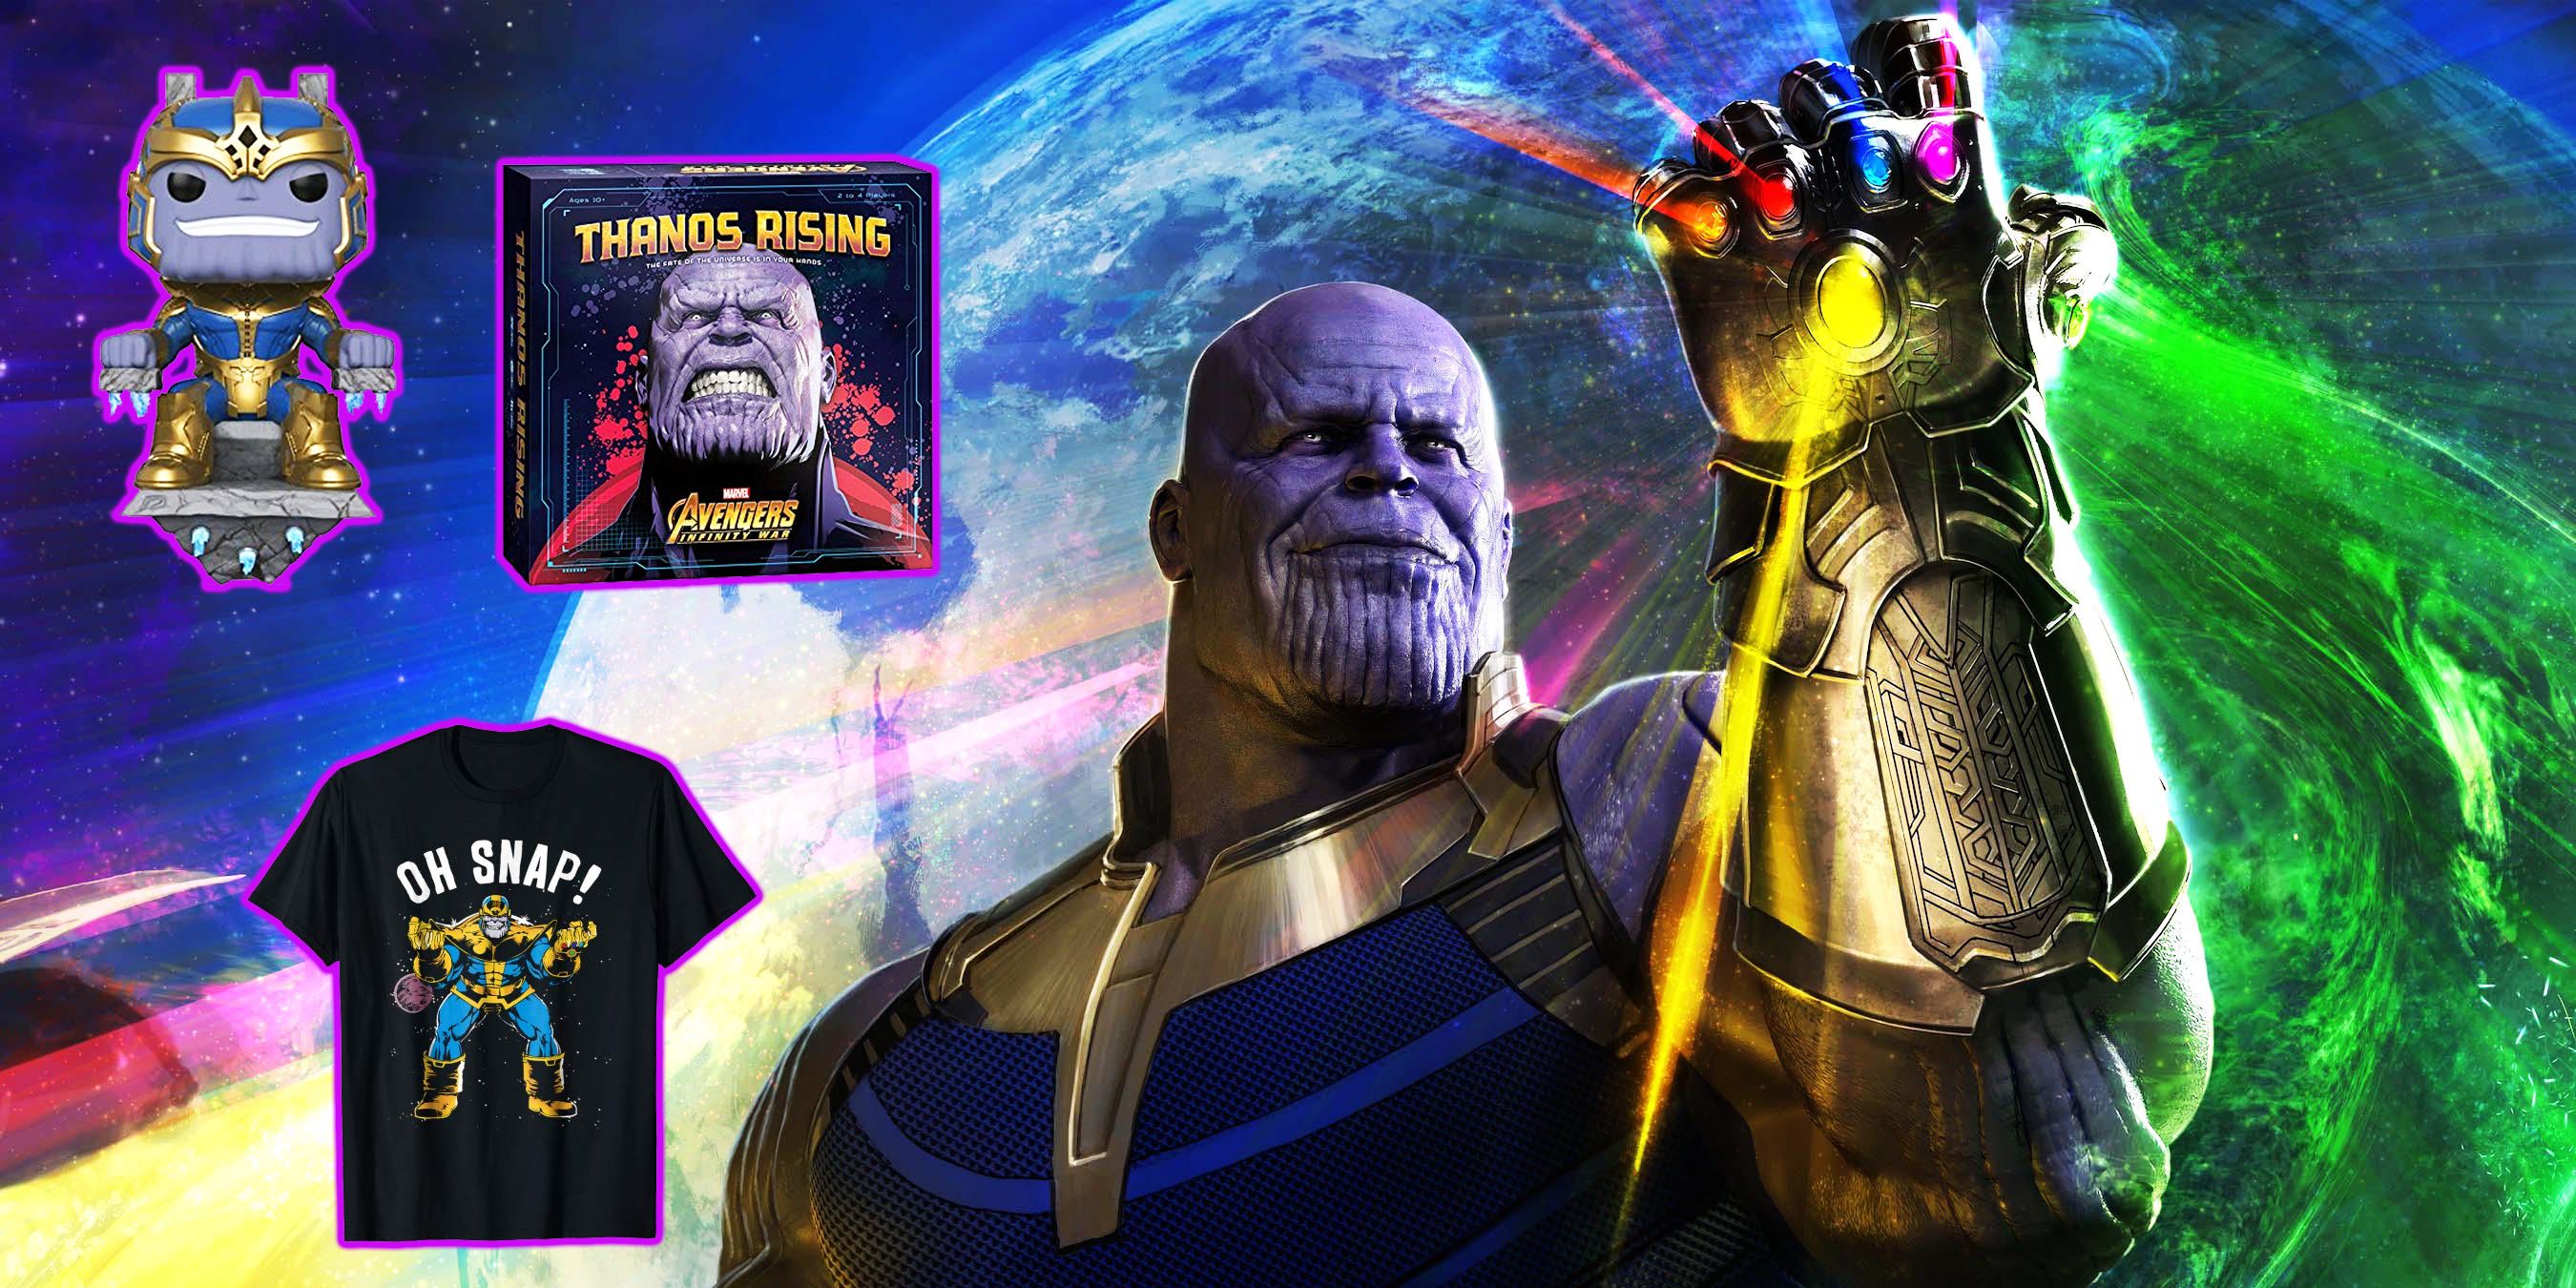 MAOFAED Thanos Gift The Avengers Infinity War Inspired Gift Superhero Gift I was Spared by Thanos